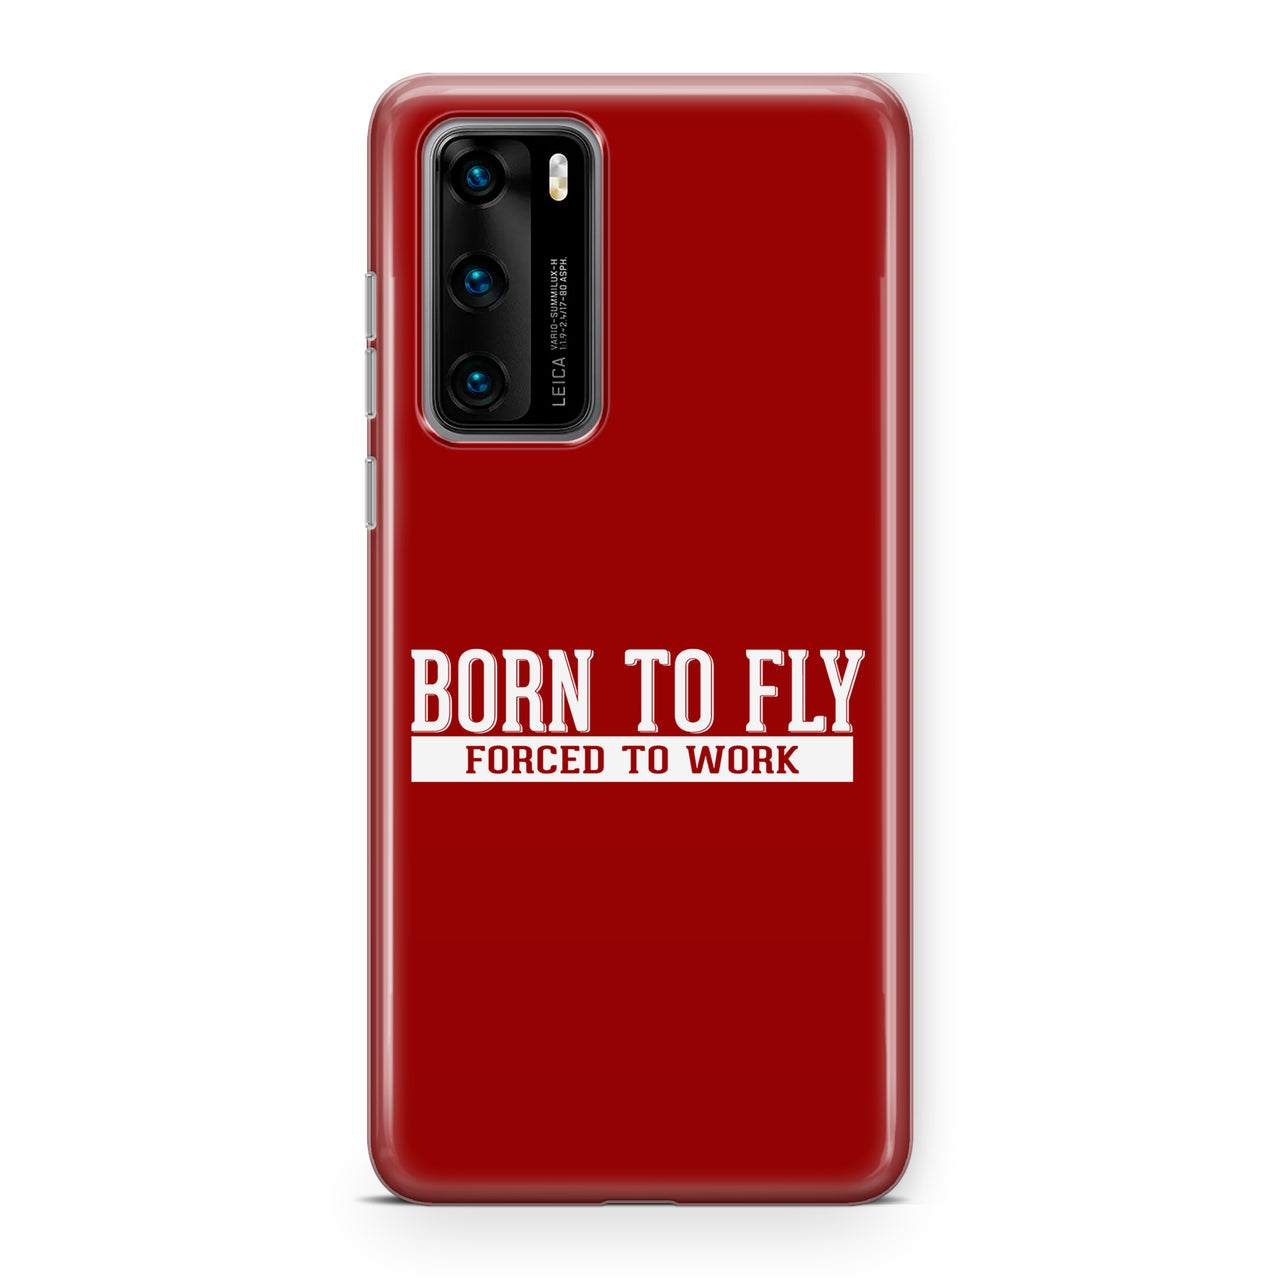 Born To Fly Forced To Work Designed Huawei Cases